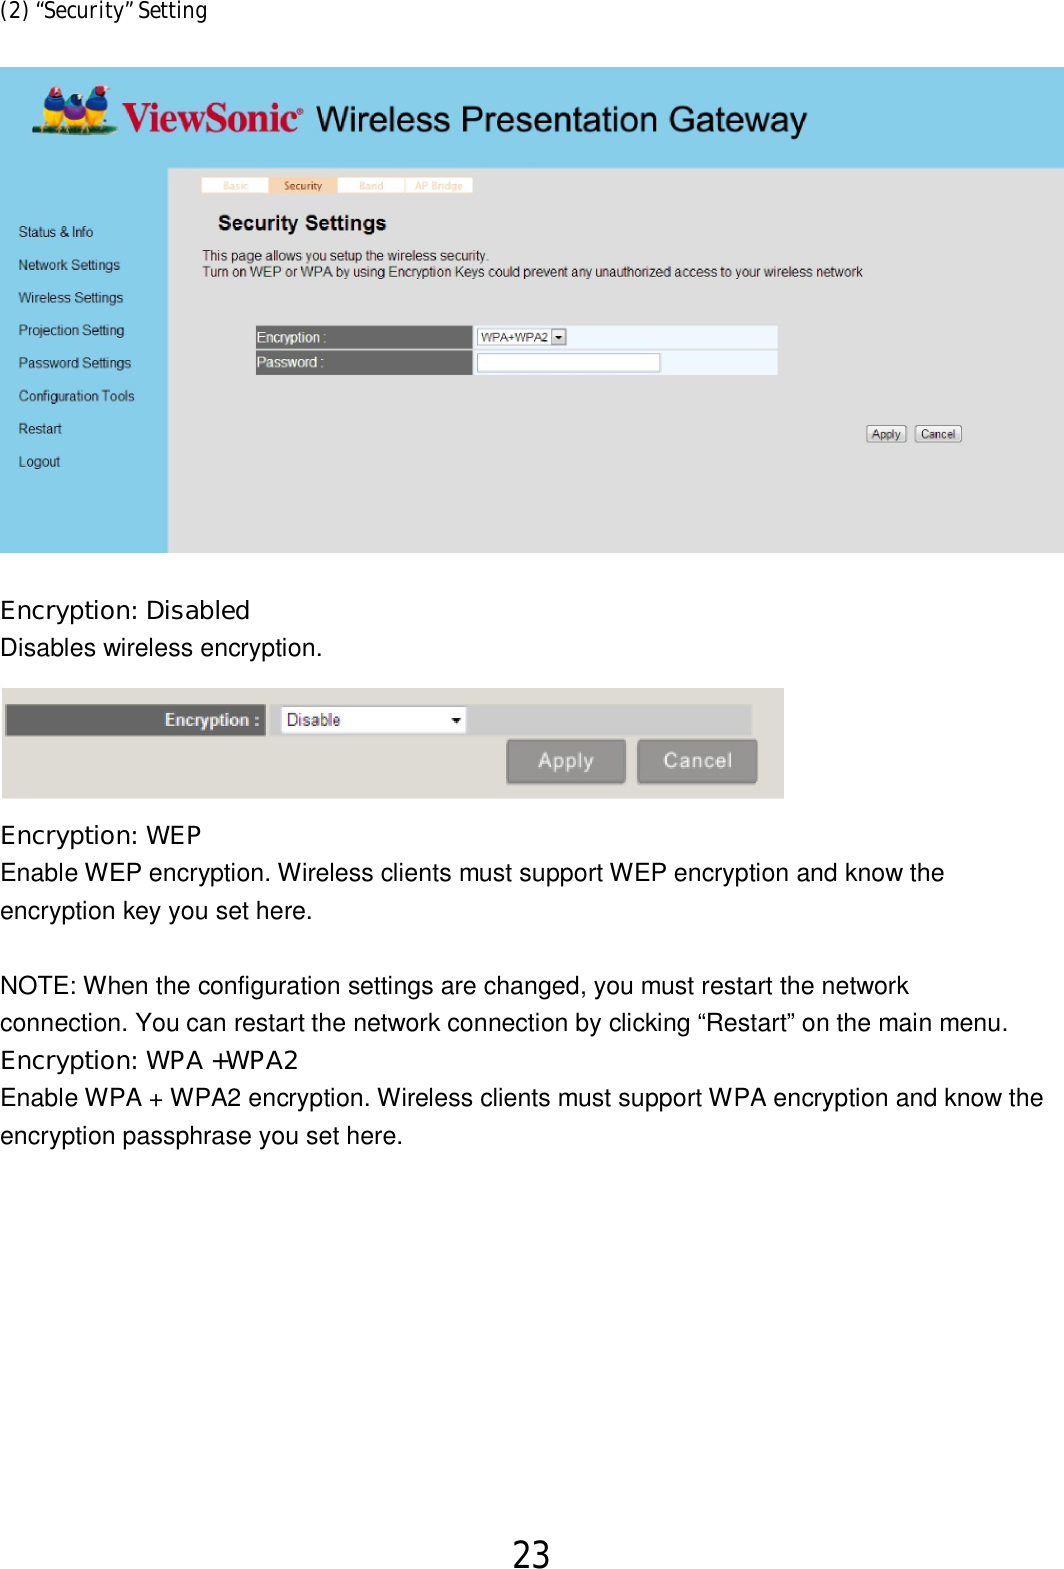 23  (2) “Security” Setting   Encryption: Disabled  Disables wireless encryption.  Encryption: WEP Enable WEP encryption. Wireless clients must support WEP encryption and know the   encryption key you set here.     NOTE: When the configuration settings are changed, you must restart the network   connection. You can restart the network connection by clicking “Restart” on the main menu. Encryption: WPA +WPA2     Enable WPA + WPA2 encryption. Wireless clients must support WPA encryption and know the   encryption passphrase you set here. 